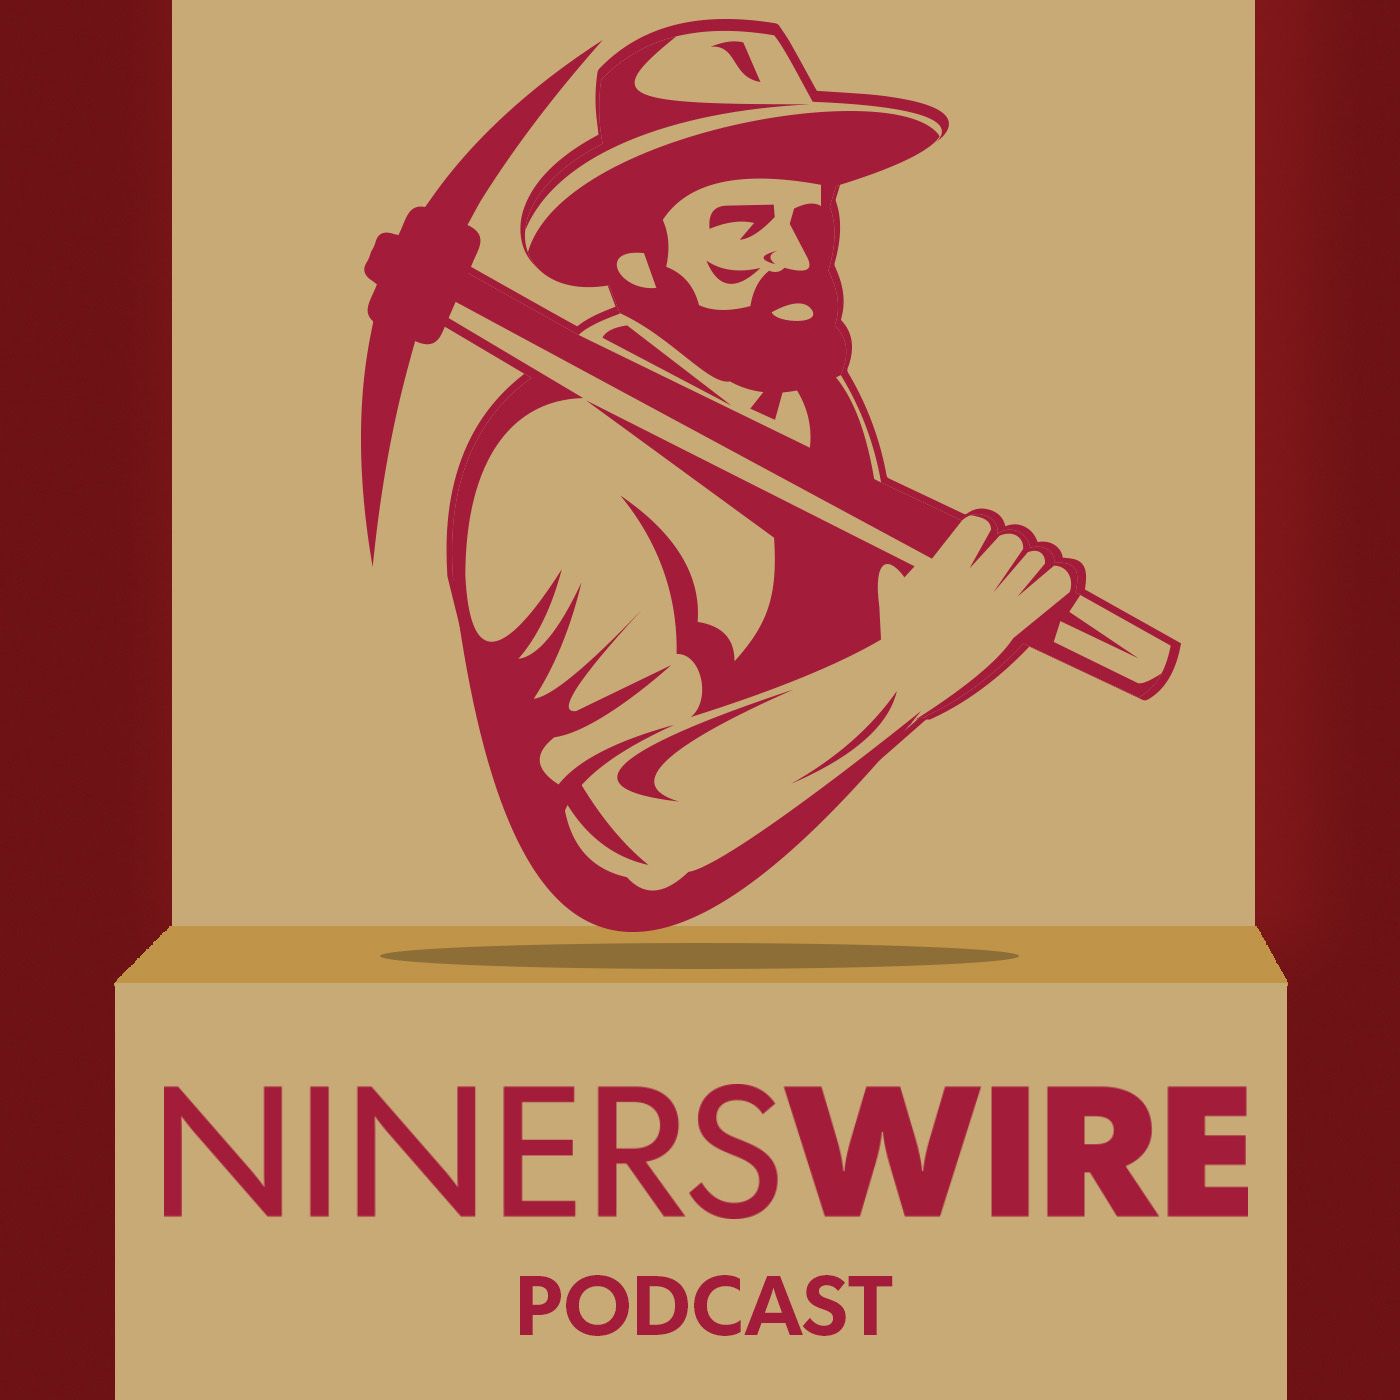 The Niners Wire Podcast